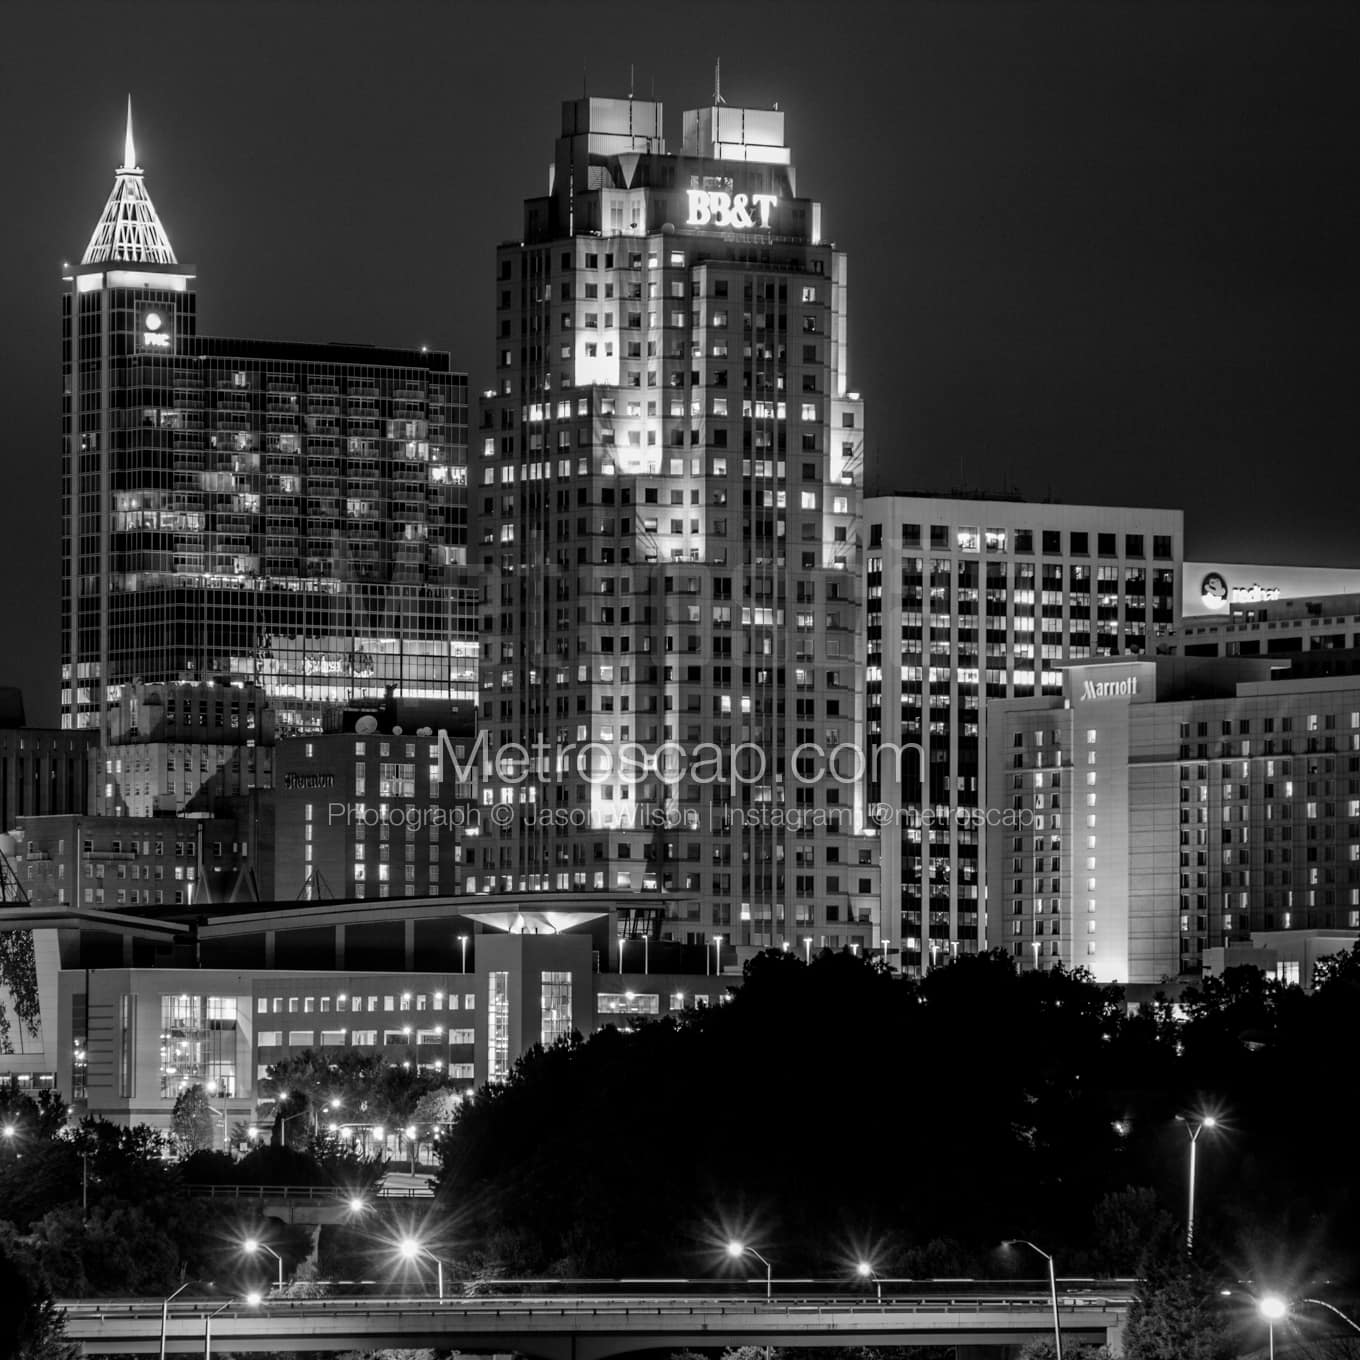 Raleigh Black & White Landscape Photography